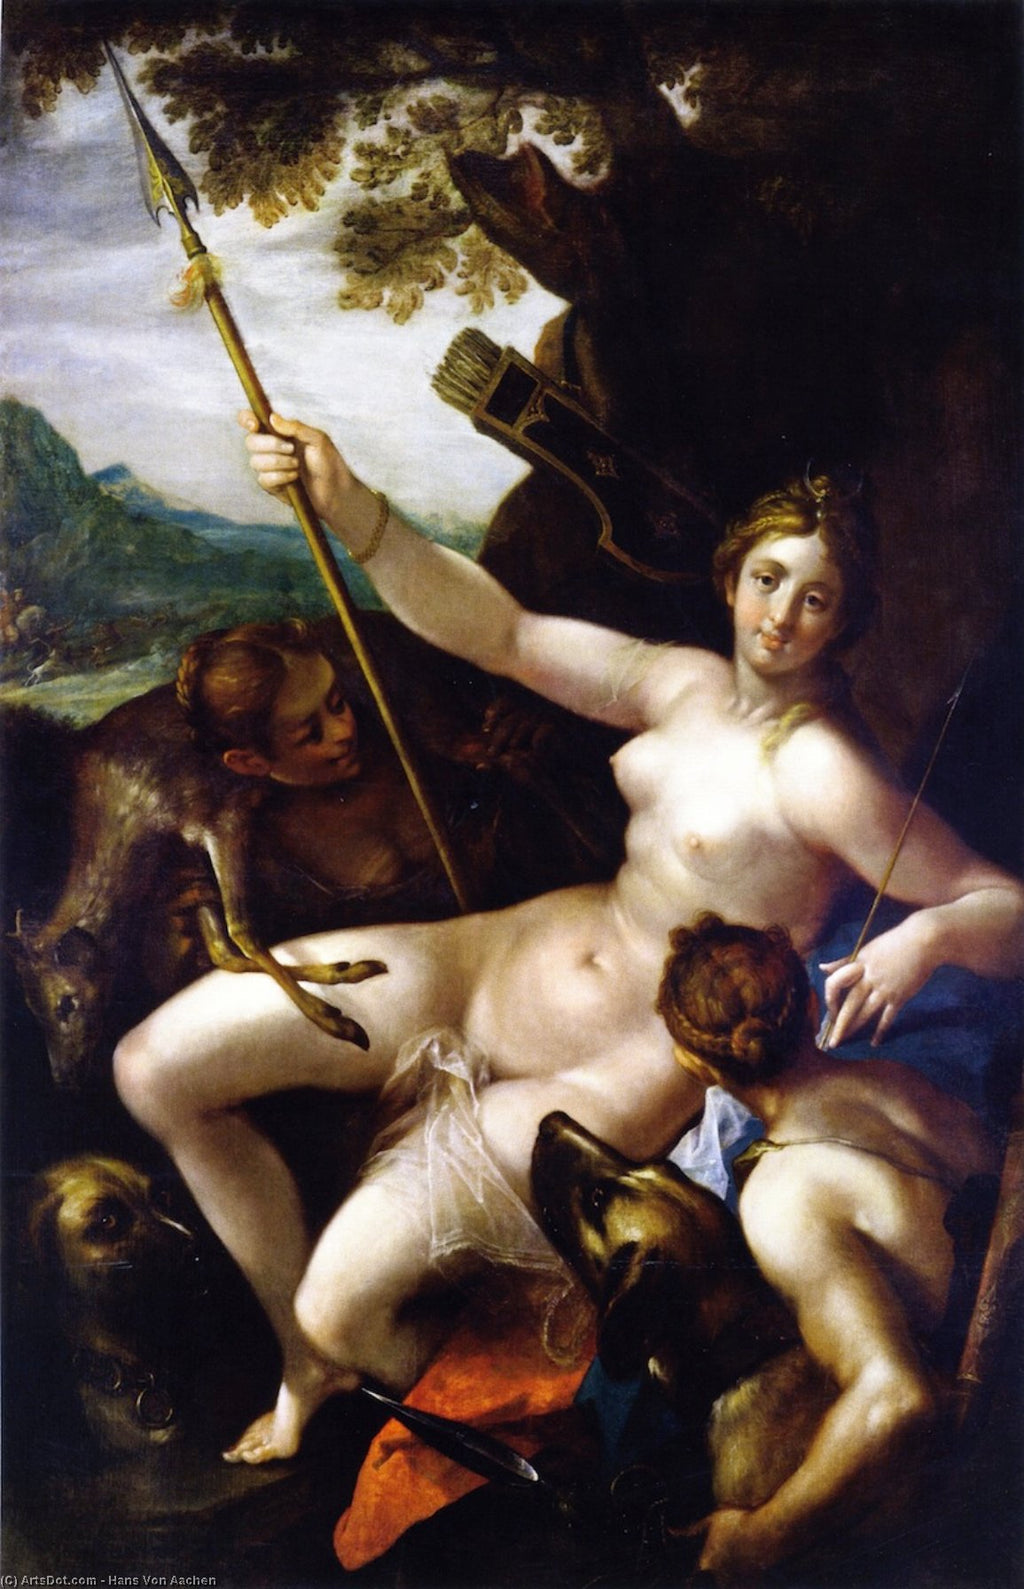 Diana and Her Nymphs at Rest after the Hunt